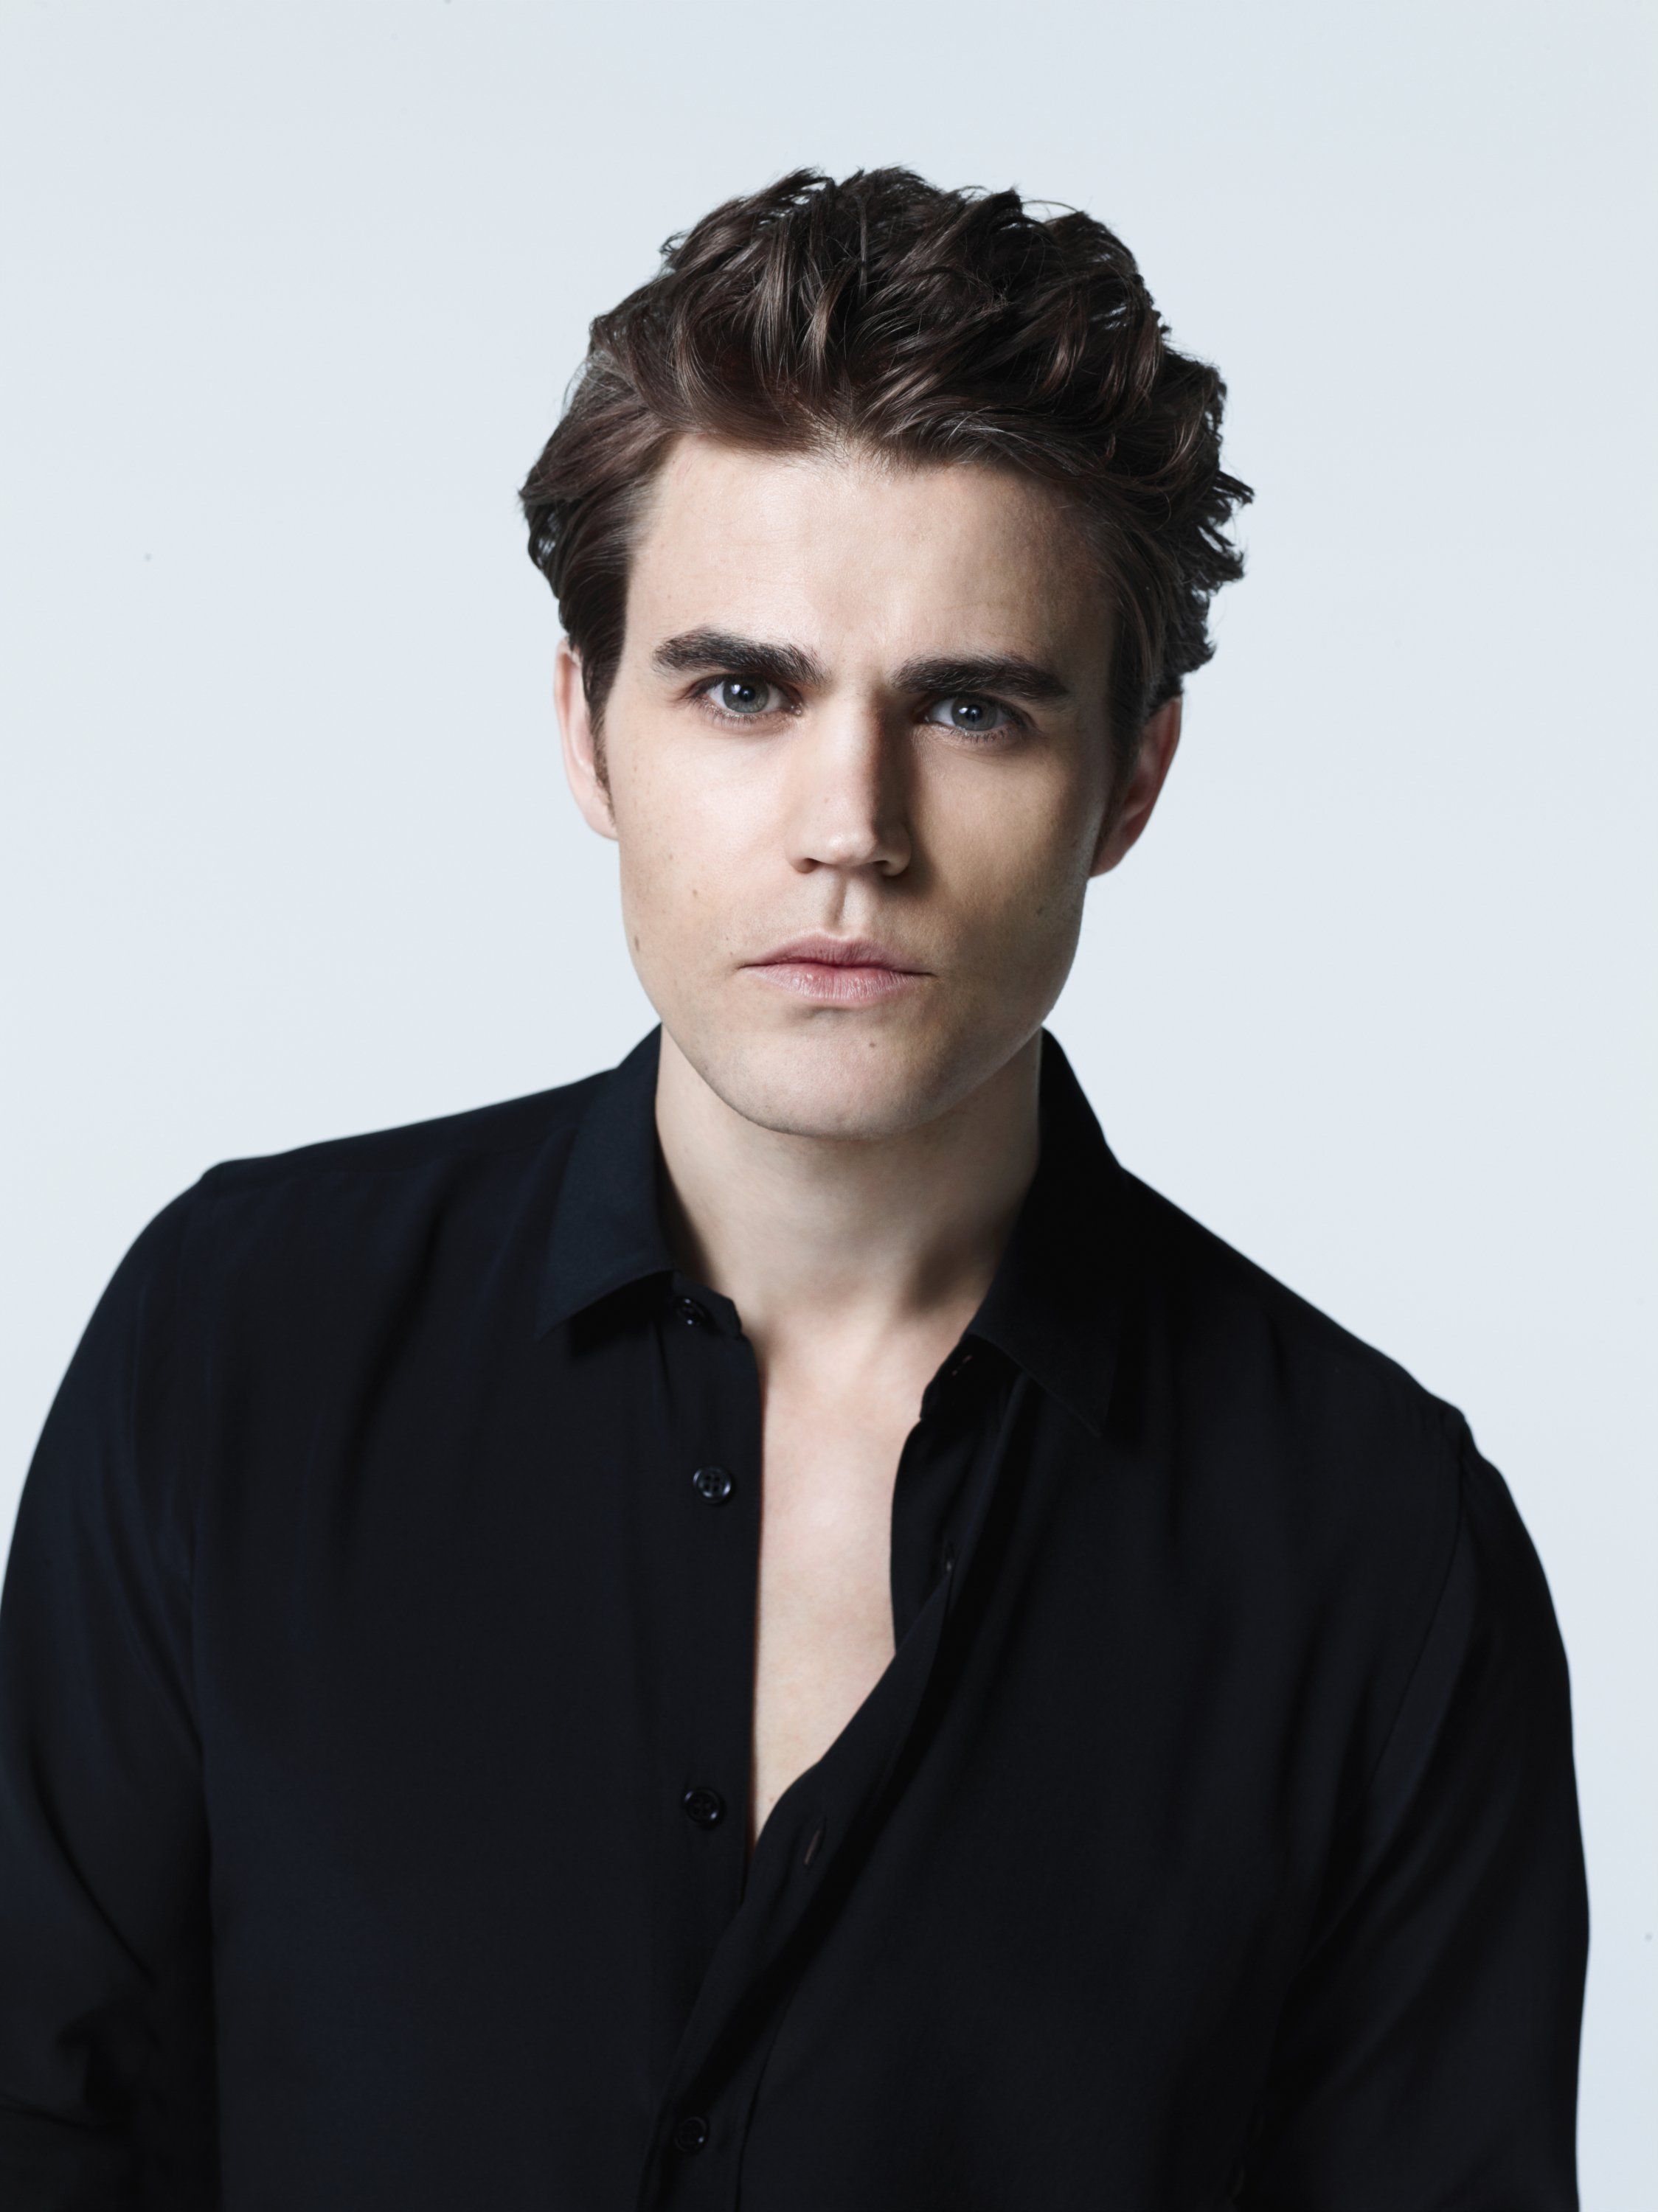 How tall is Paul Wesley?